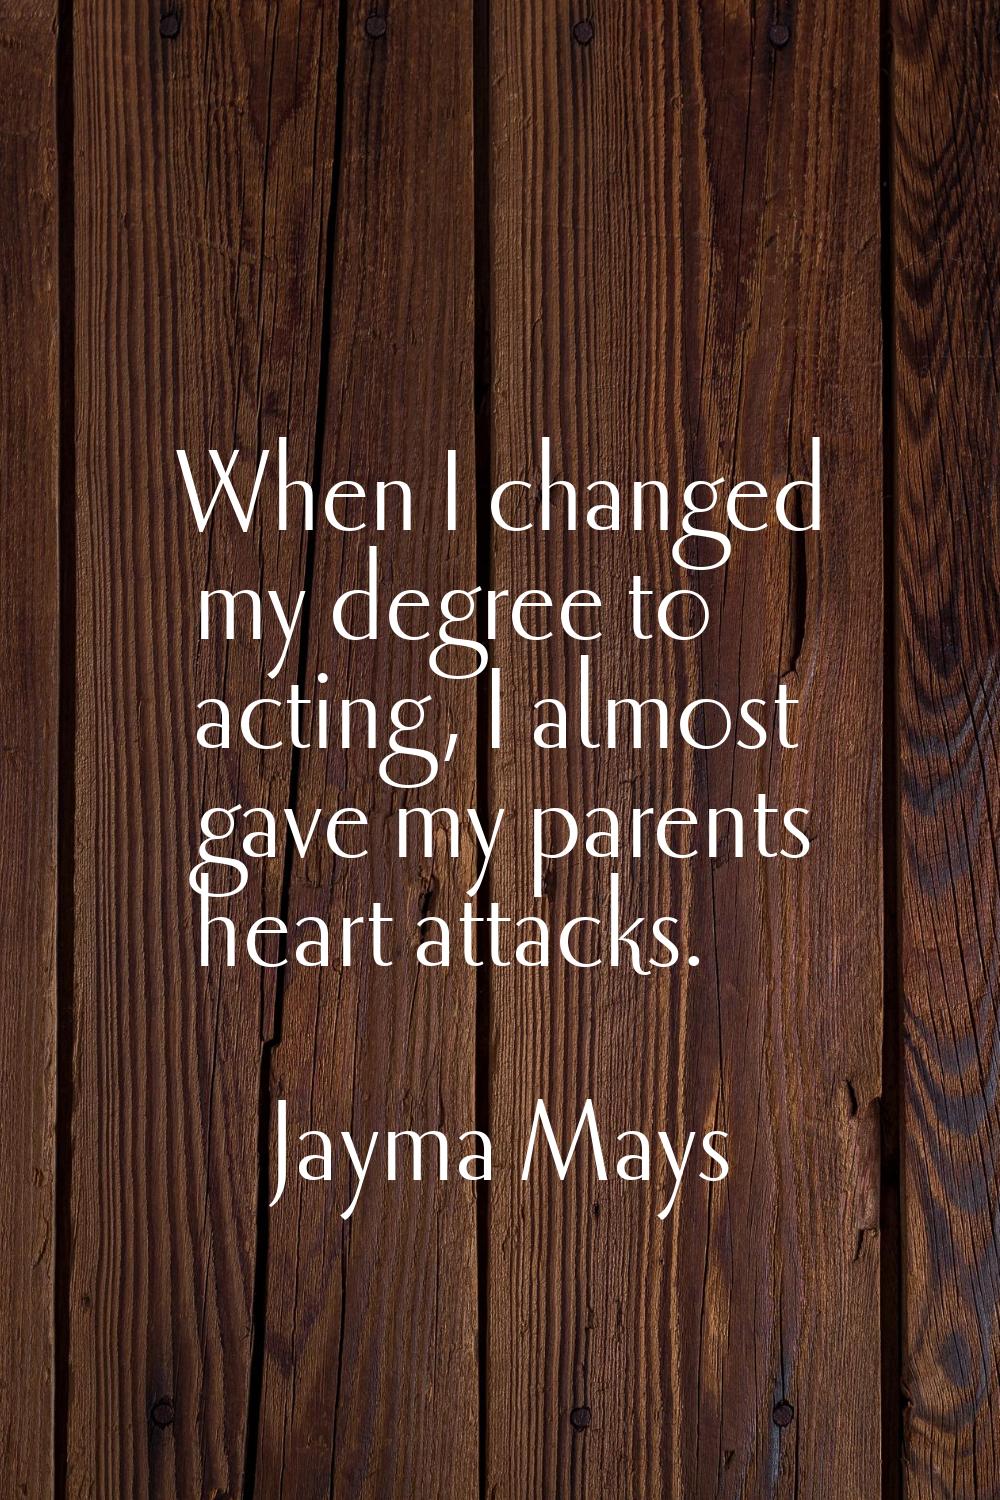 When I changed my degree to acting, I almost gave my parents heart attacks.